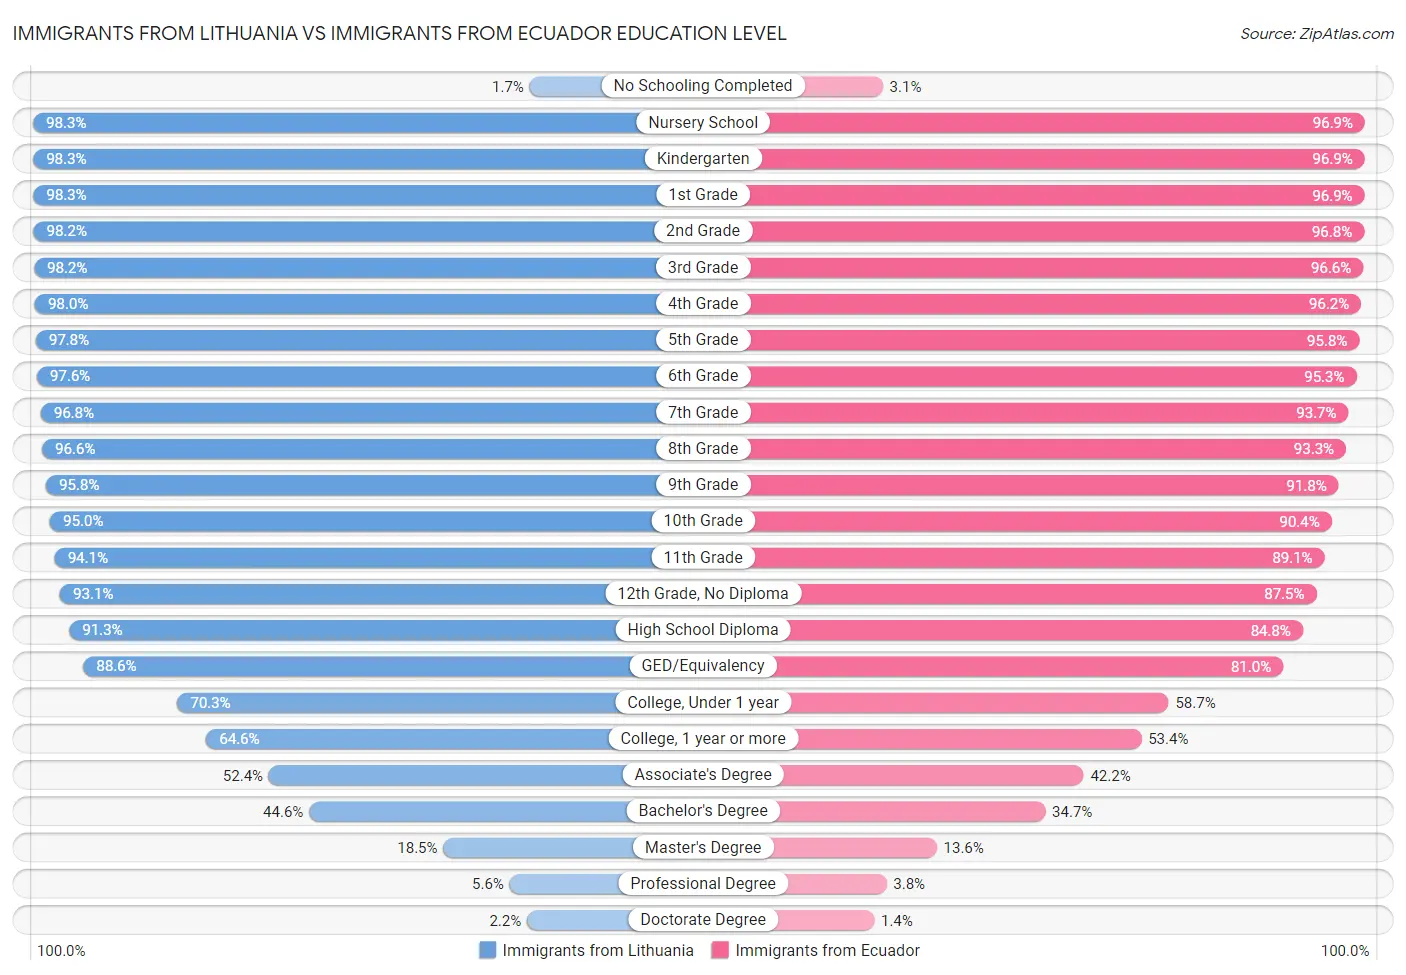 Immigrants from Lithuania vs Immigrants from Ecuador Education Level